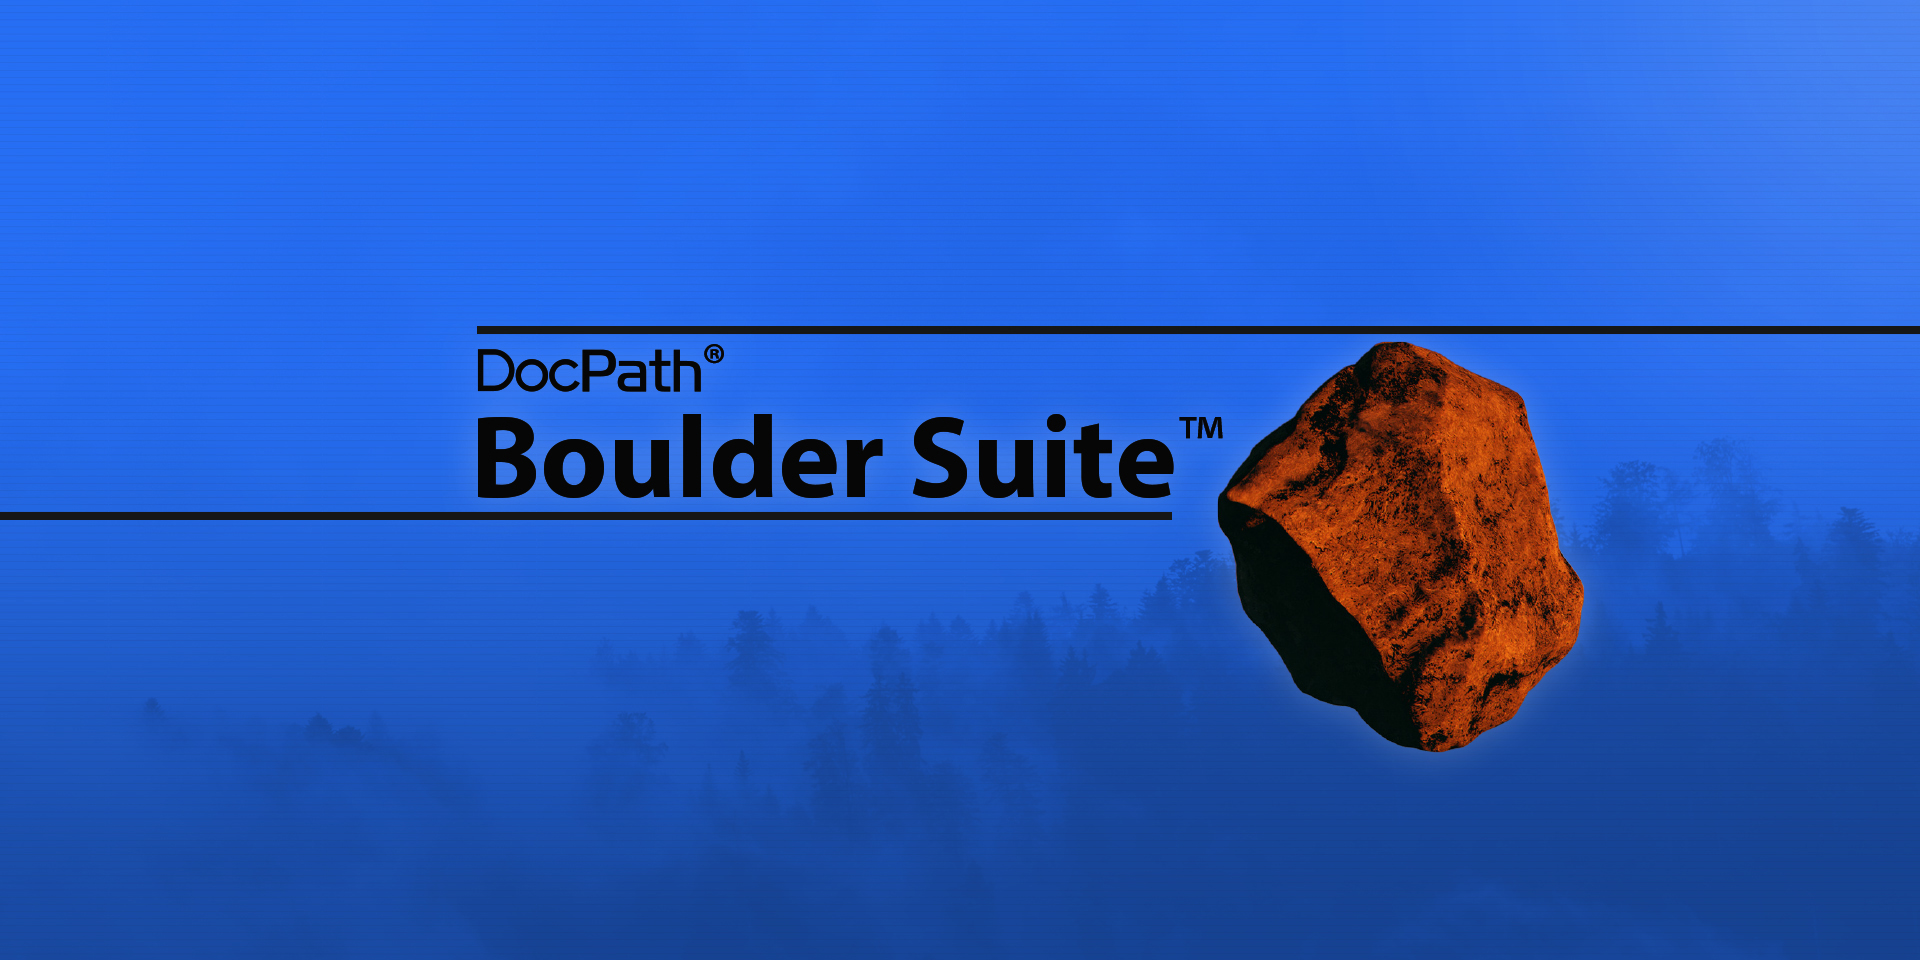 Migrating from IBM InfoPrint Designer moving to advanced document communications with DocPath Boulder Suite